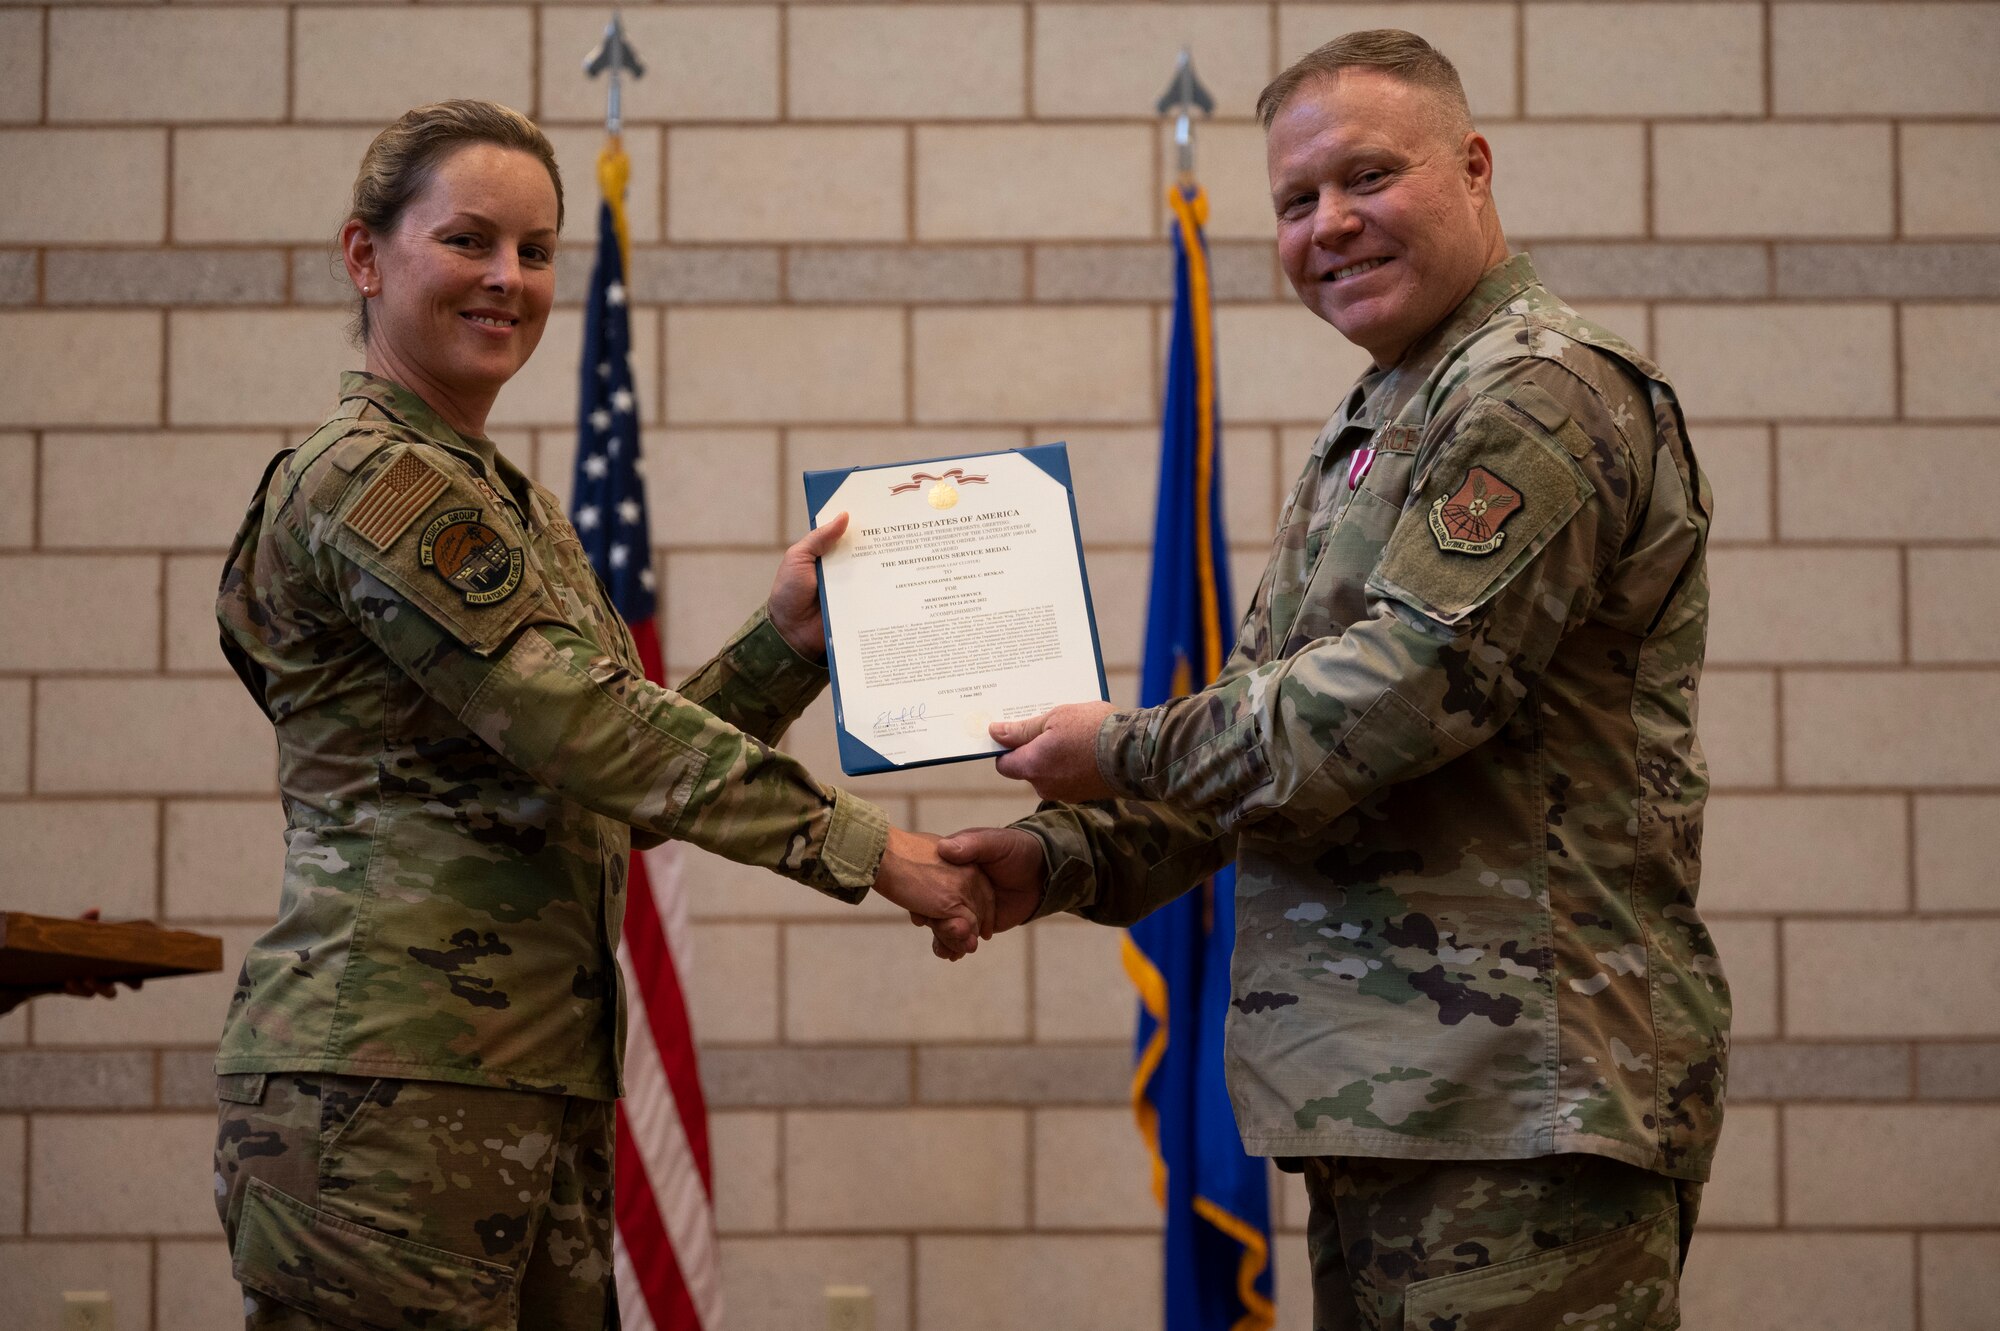 Col. Elizabeth Somsel, 7th Medical Group commander, presents the Meritorious Service Medal to Lt. Col. Michael Renkas, 7th Medical Support Squadron commander, during the 7th MDSS Inactivation Ceremony at Dyess Air Force Base, Texas, June 24, 2022. The Meritorious Service Medal is a military award presented to members of the United States Armed Forces who distinguished themselves by outstanding meritorious achievement or service to the United States. (U.S. Air Force photo by Senior Airman Reilly McGuire)